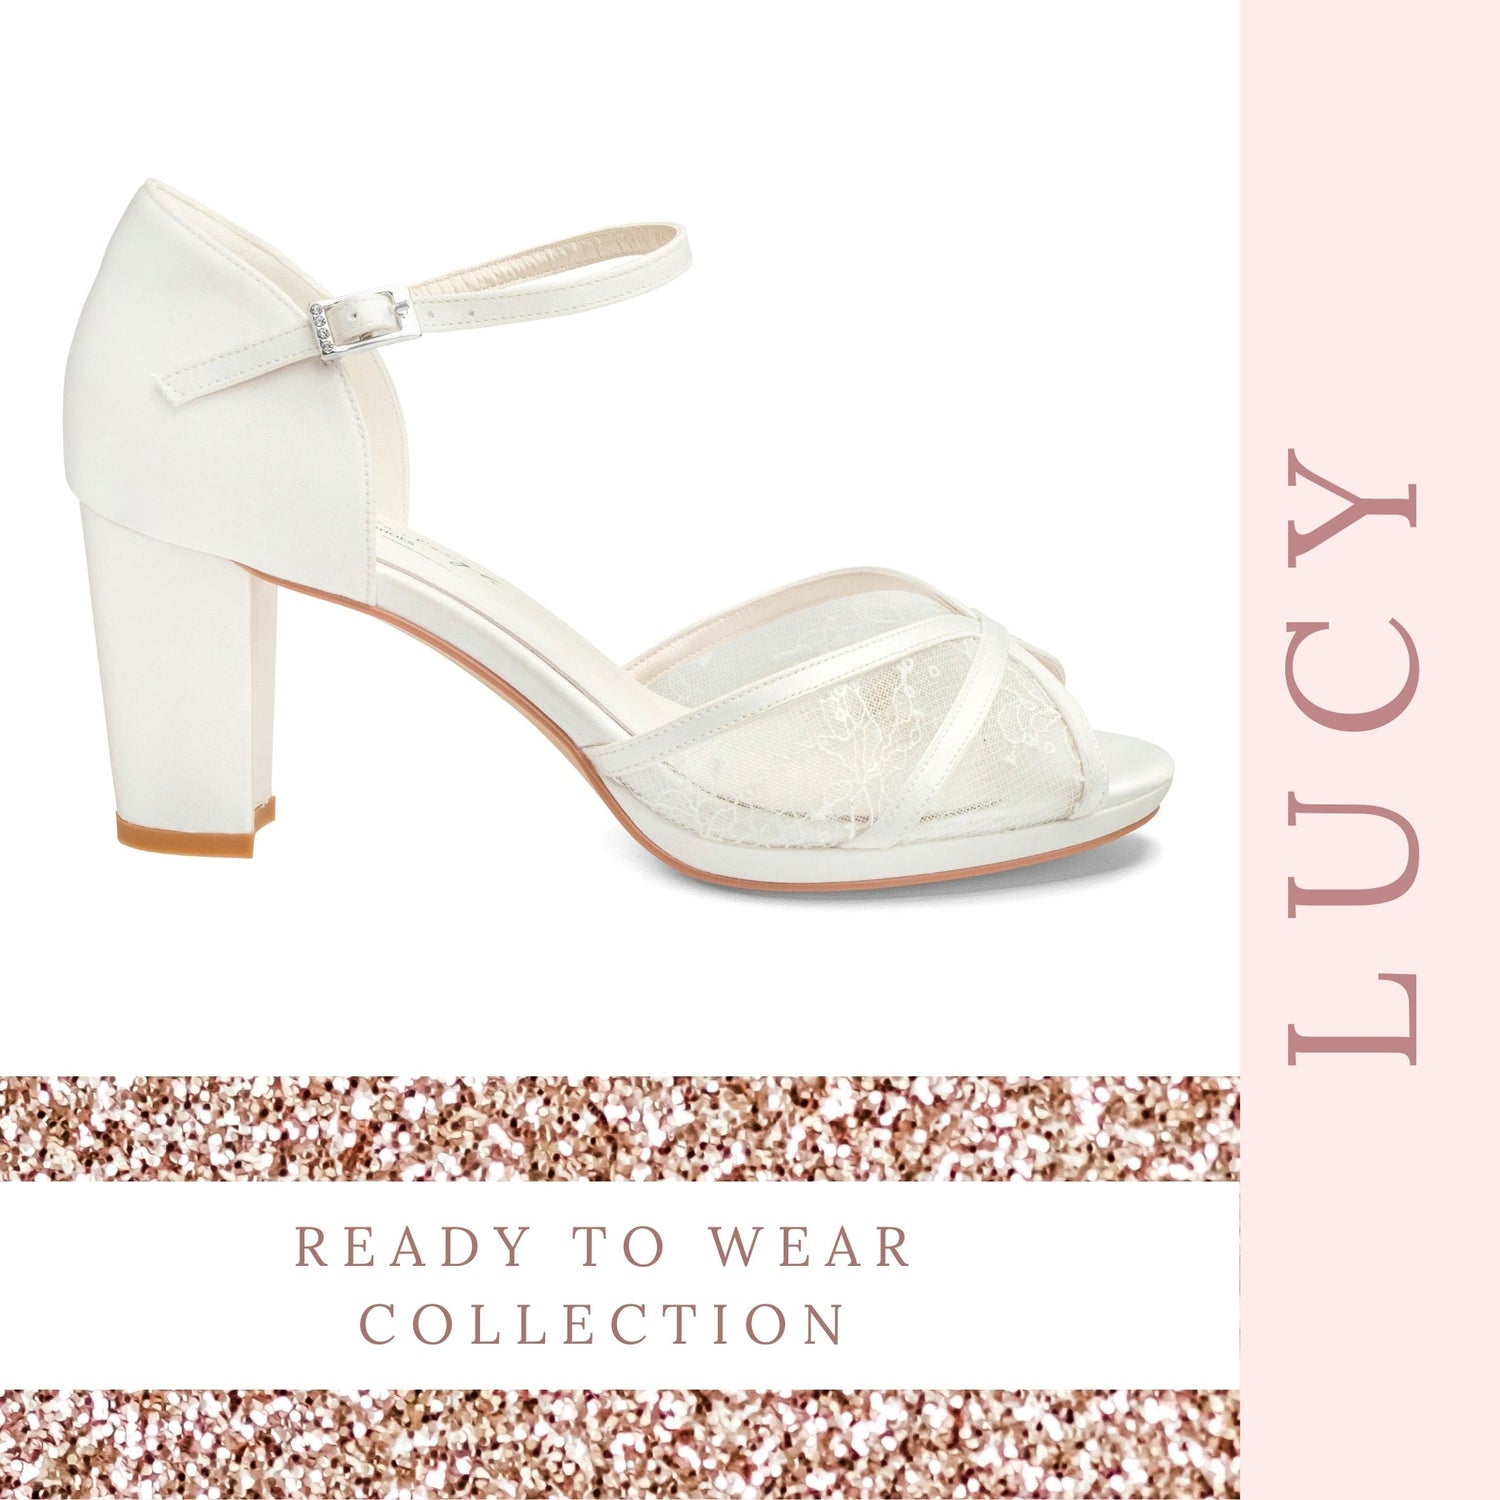 Ivory Satin Block Heel Sandals with Floral Rhinestones | Block heels  sandal, Sandals heels, Heels